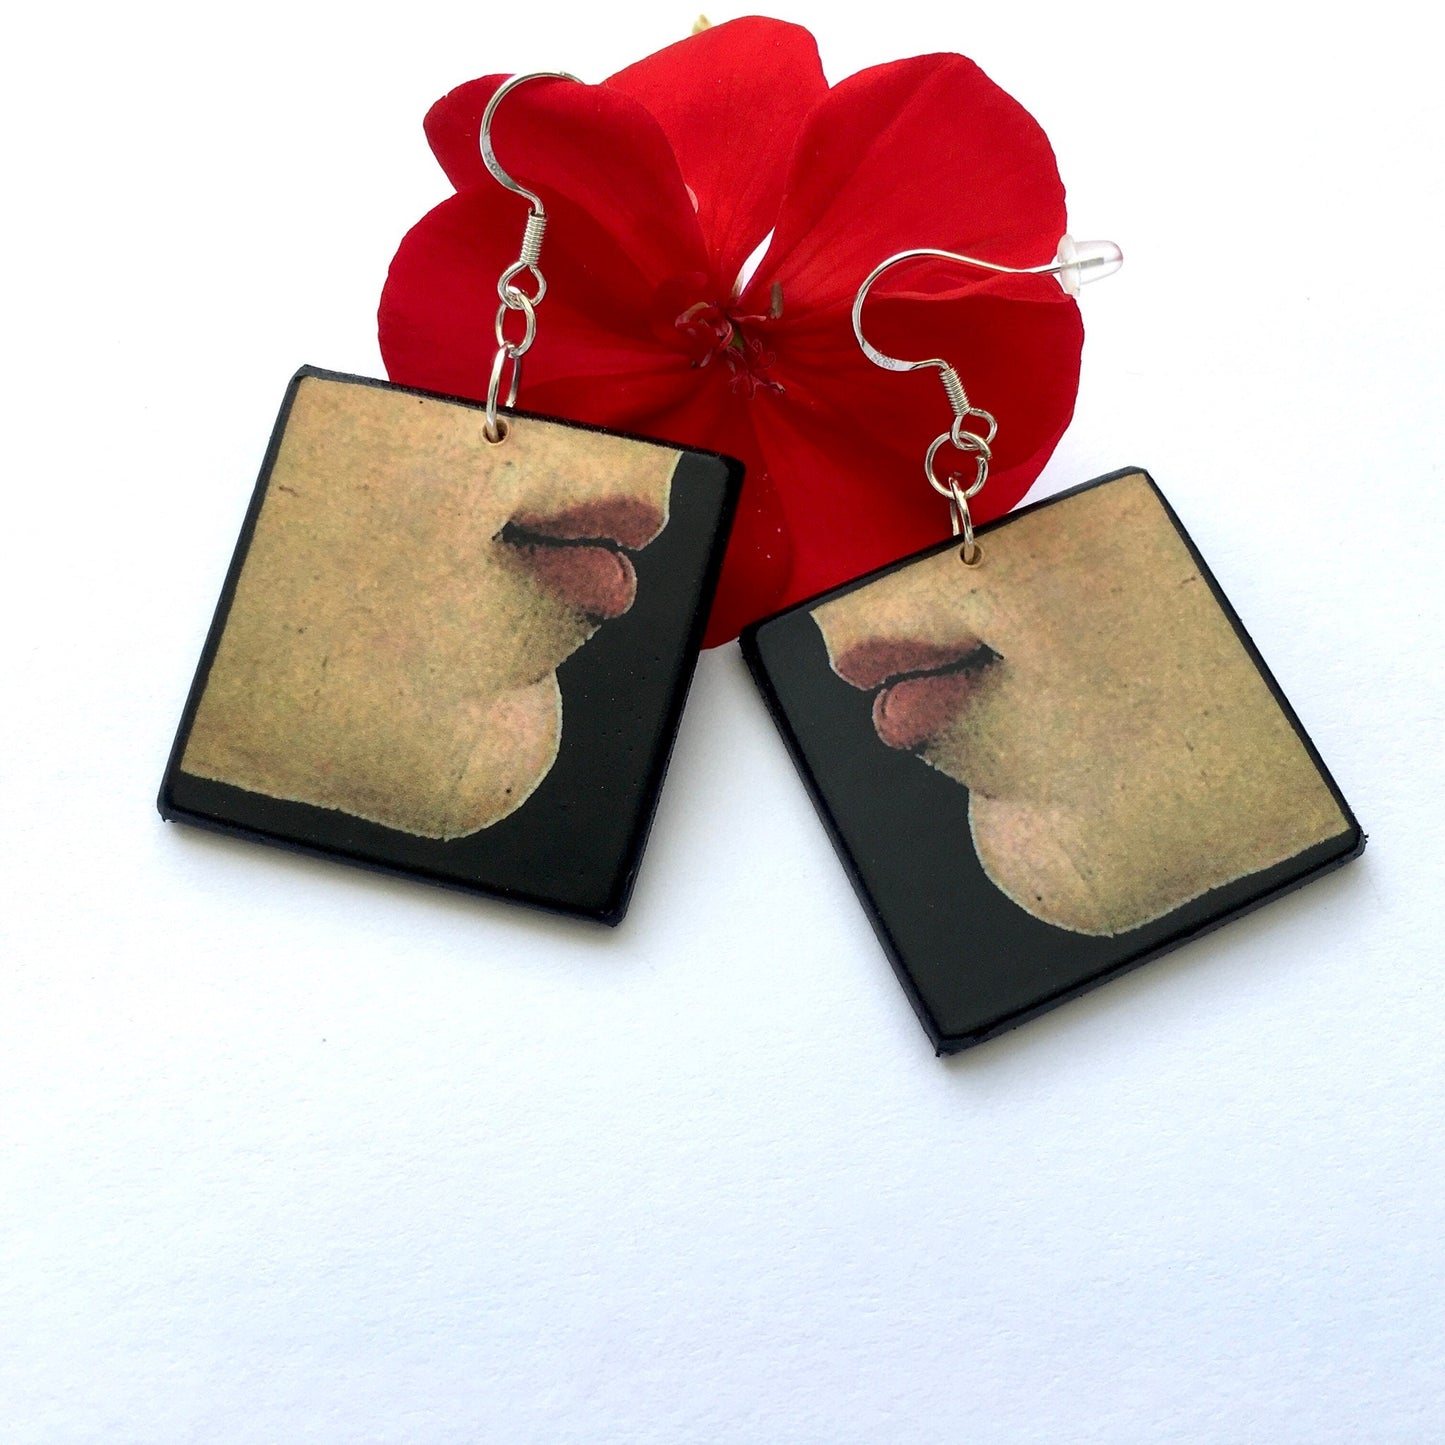 Unusual earrings on wood with a lip art detail painting of Young Woman Renaissance painting by Botticelli. These mismatched art earrings are handmade on sustainable wood.